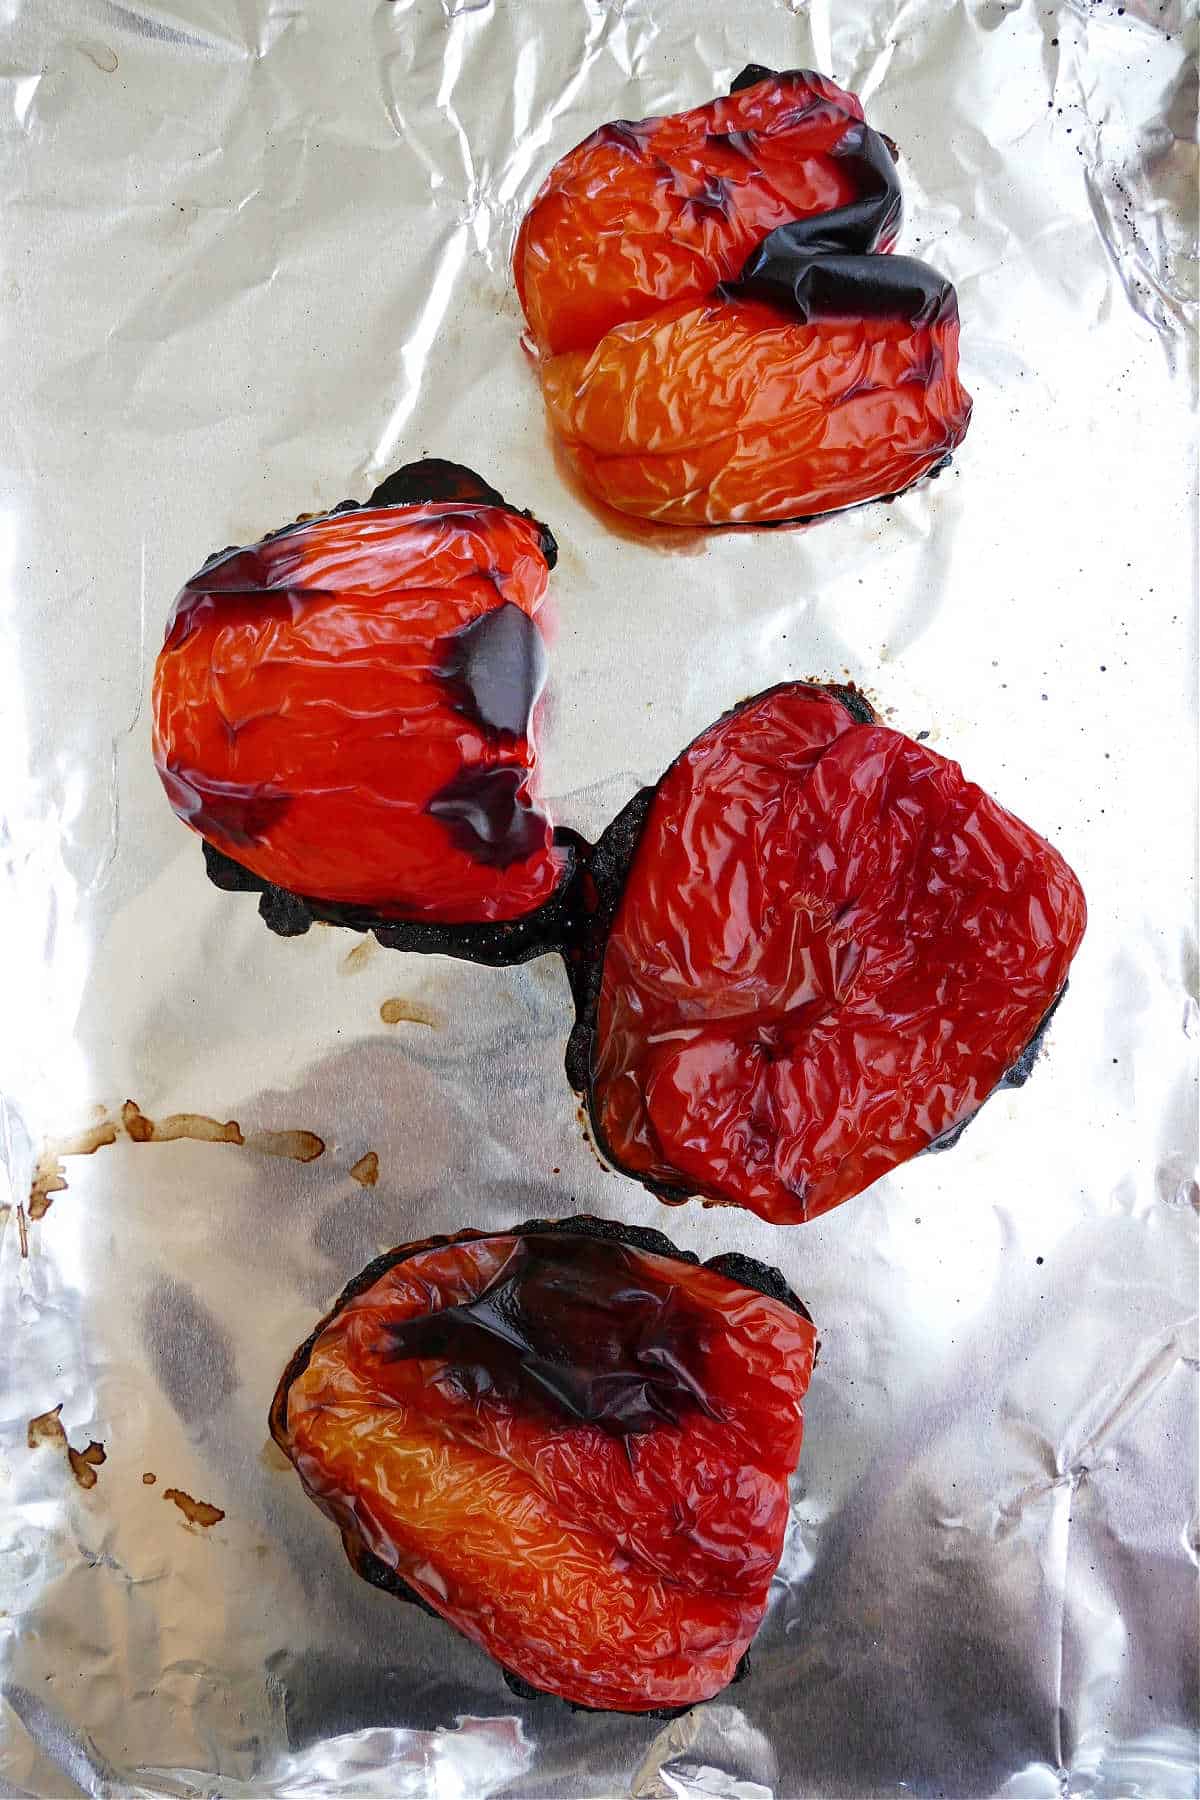 roasted red peppers on a baking sheet lined with aluminum foil